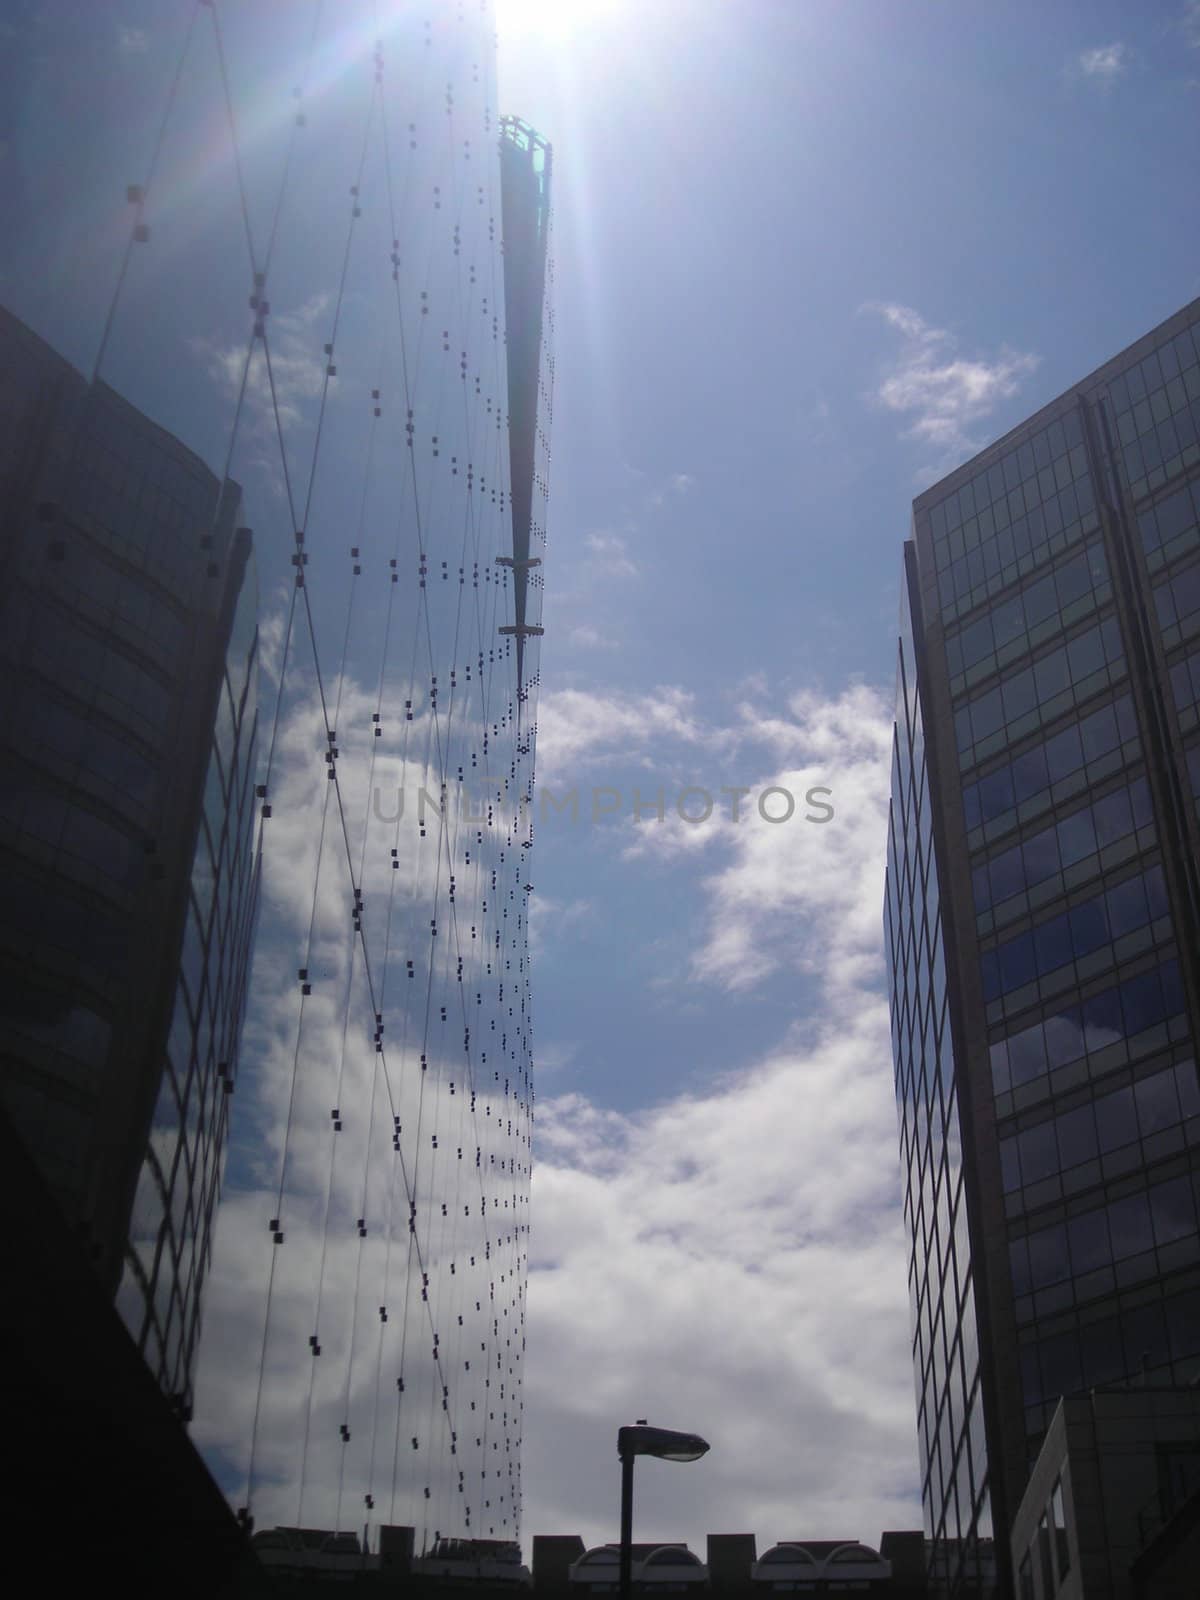 The light of the sun over the glass of a London's skyscraper.